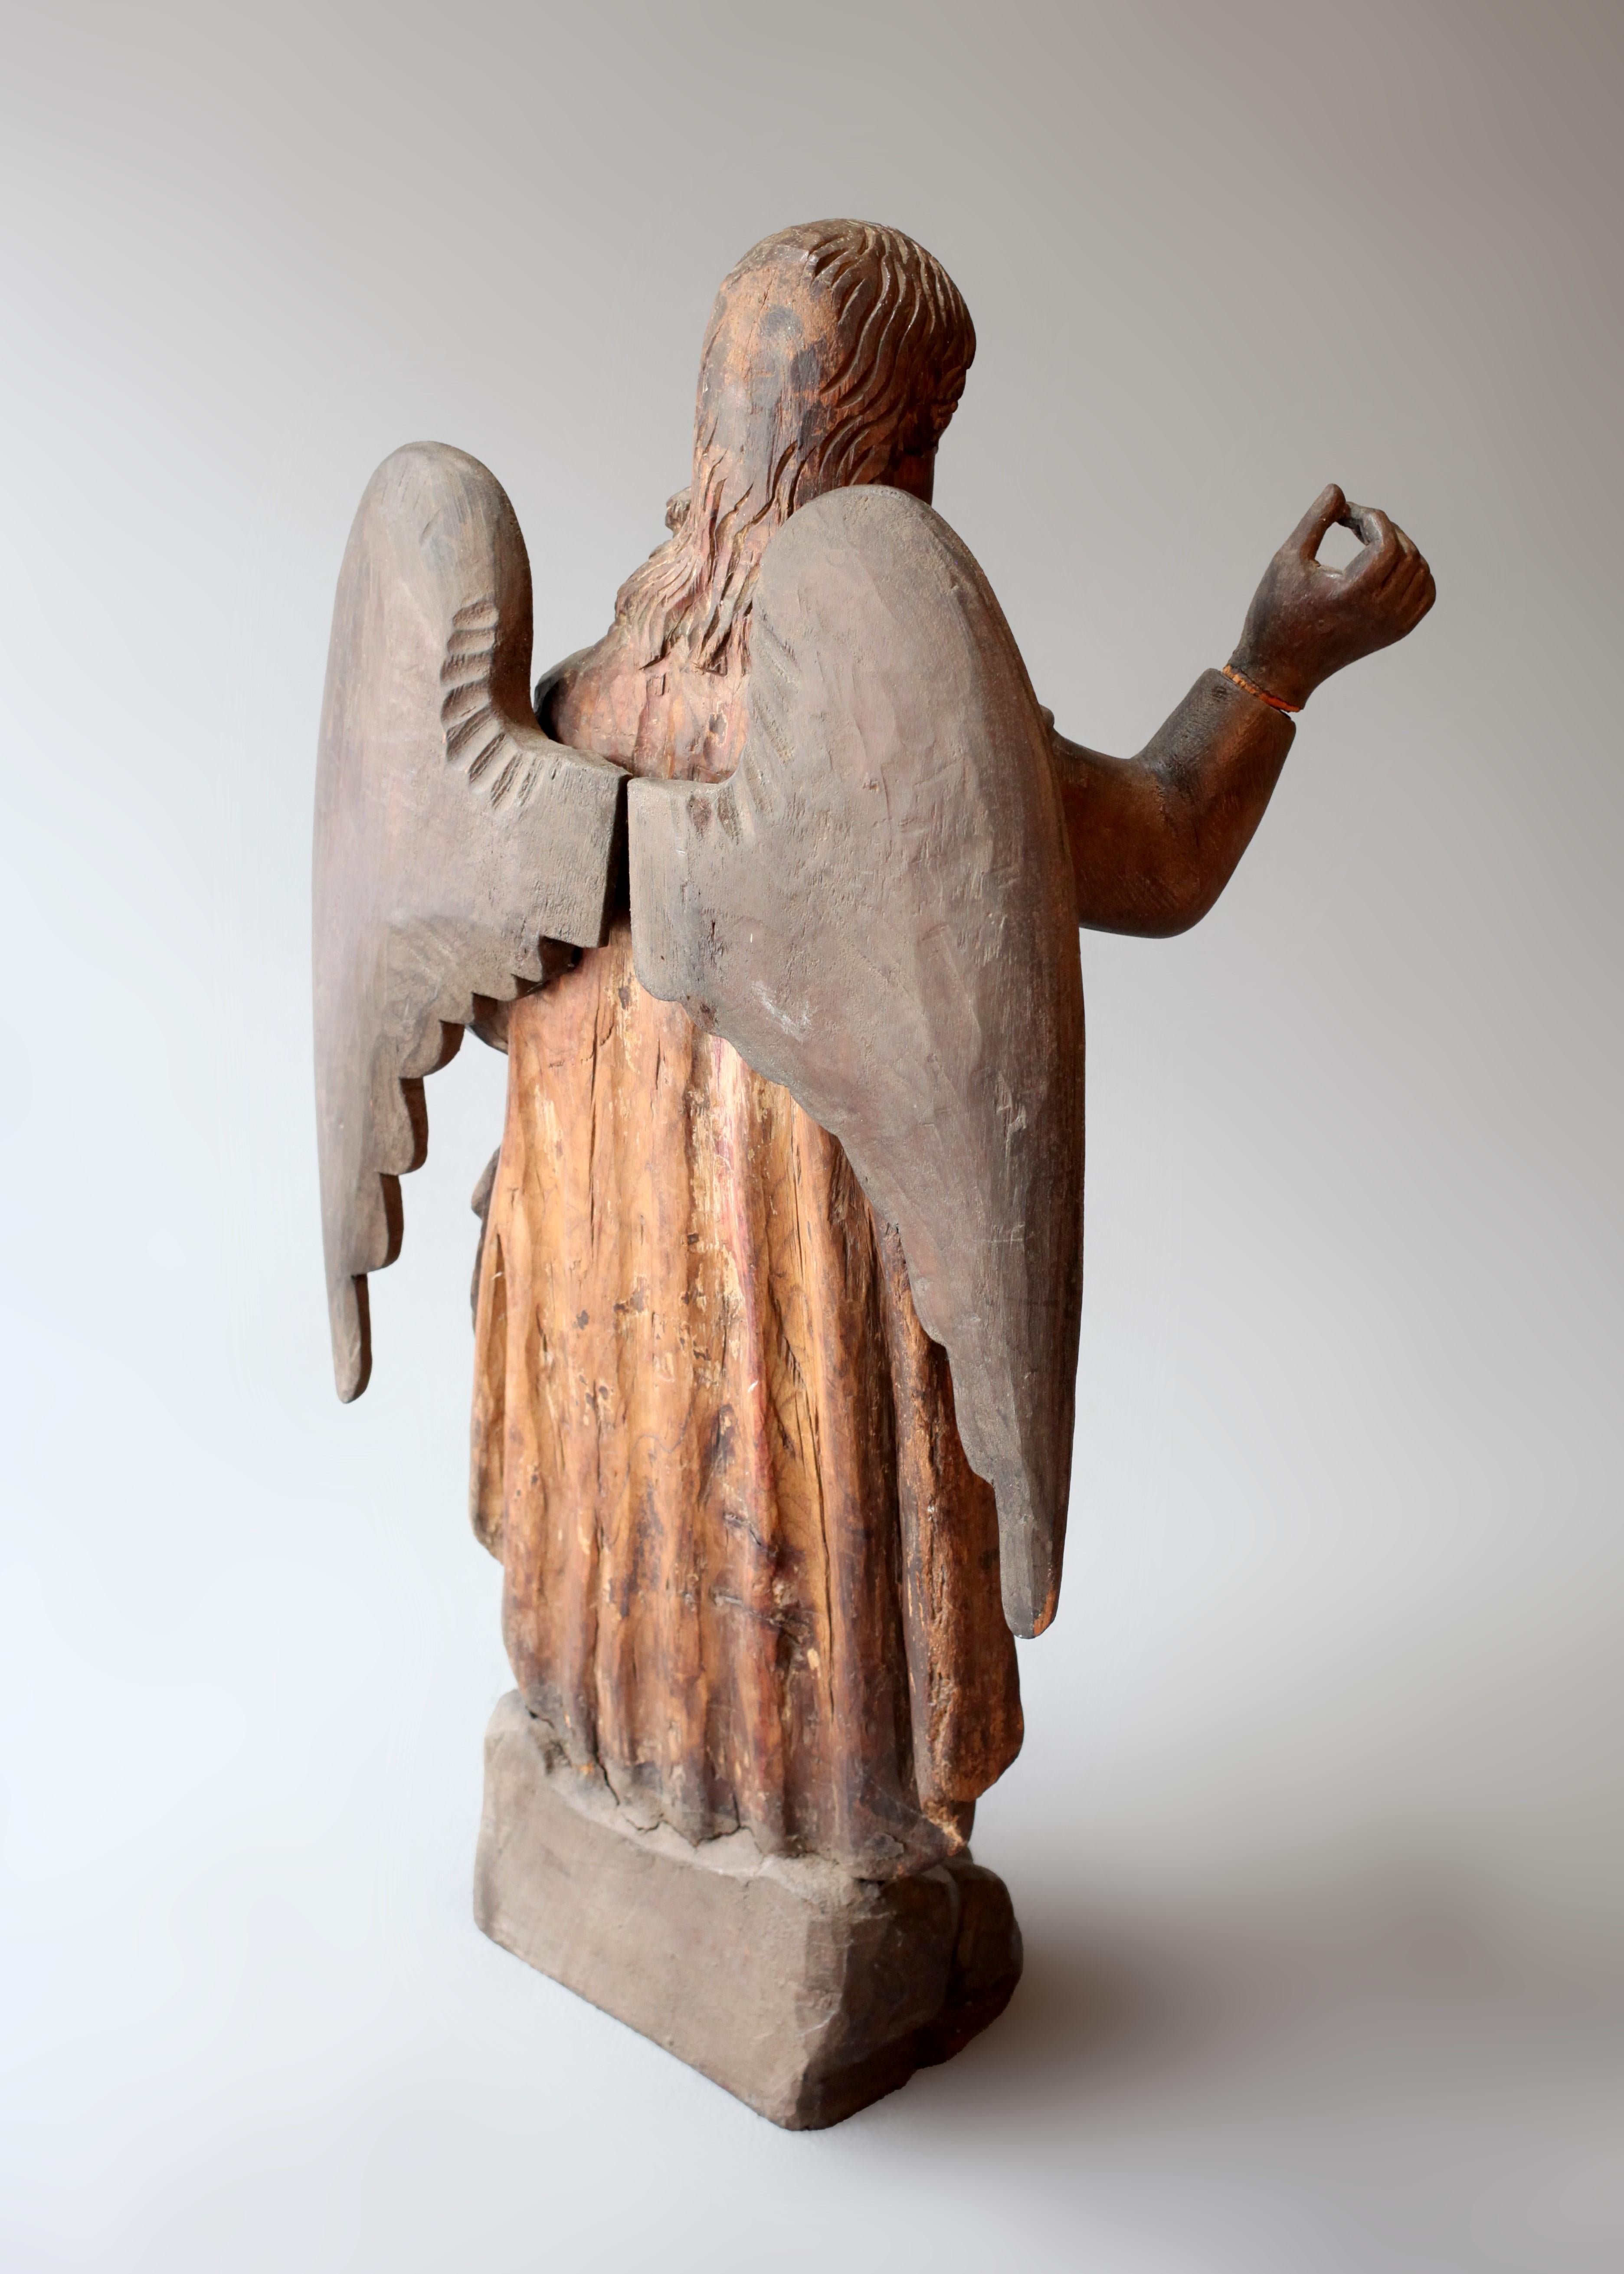 Symbolism and craftsmanship aside, this Guatemalan Carved Wood Altar Figure of the Angel Gabriel from the 18th century holds within it an immense energy of historical significance. Altar figures were purposeful objects of devotional connection,